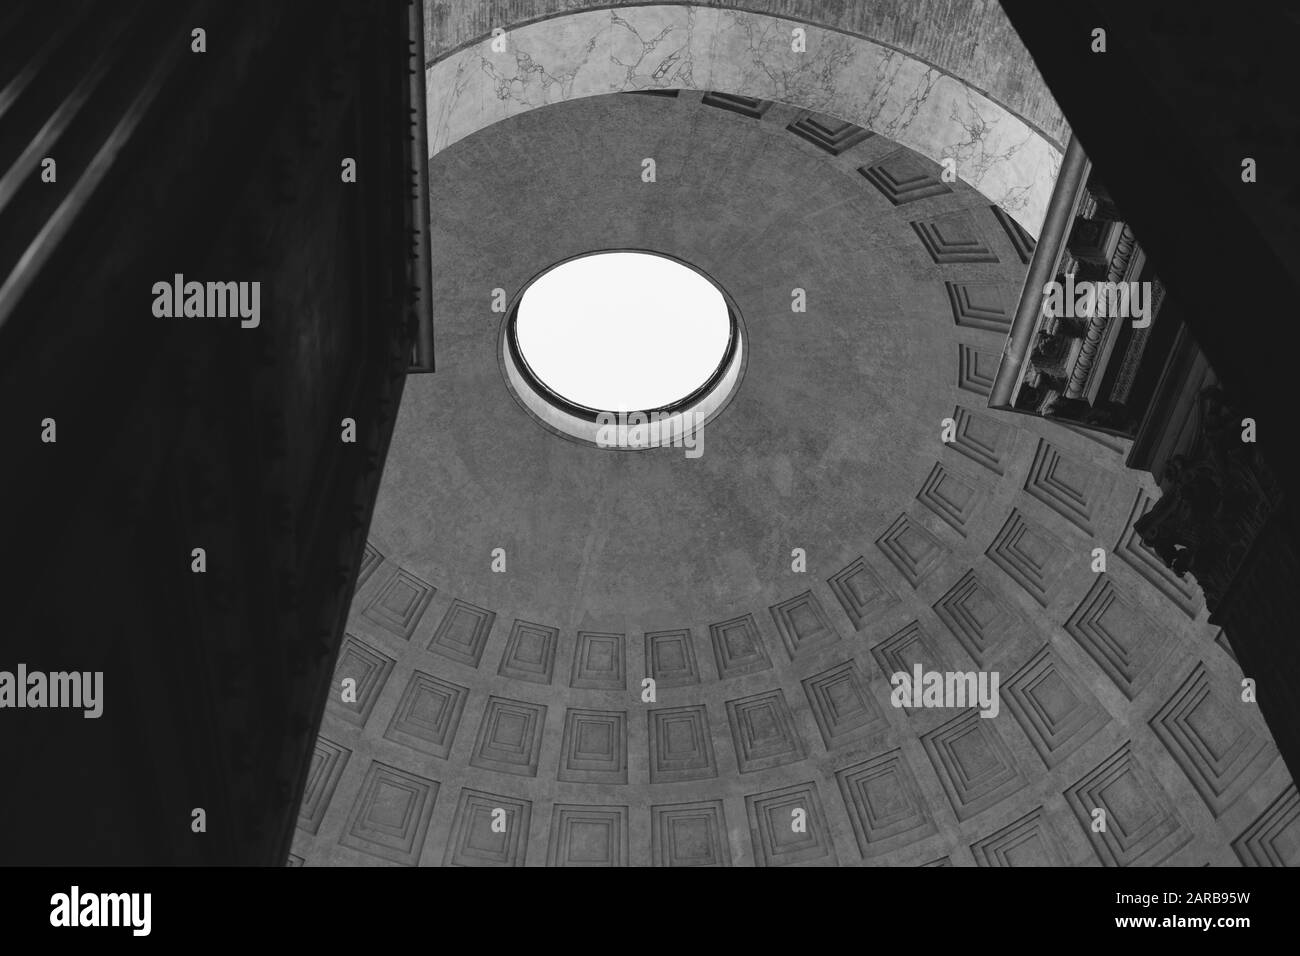 Rome, Italy - Dec 31, 2019: Dome of the Pantheon, Rome, Italy Stock Photo